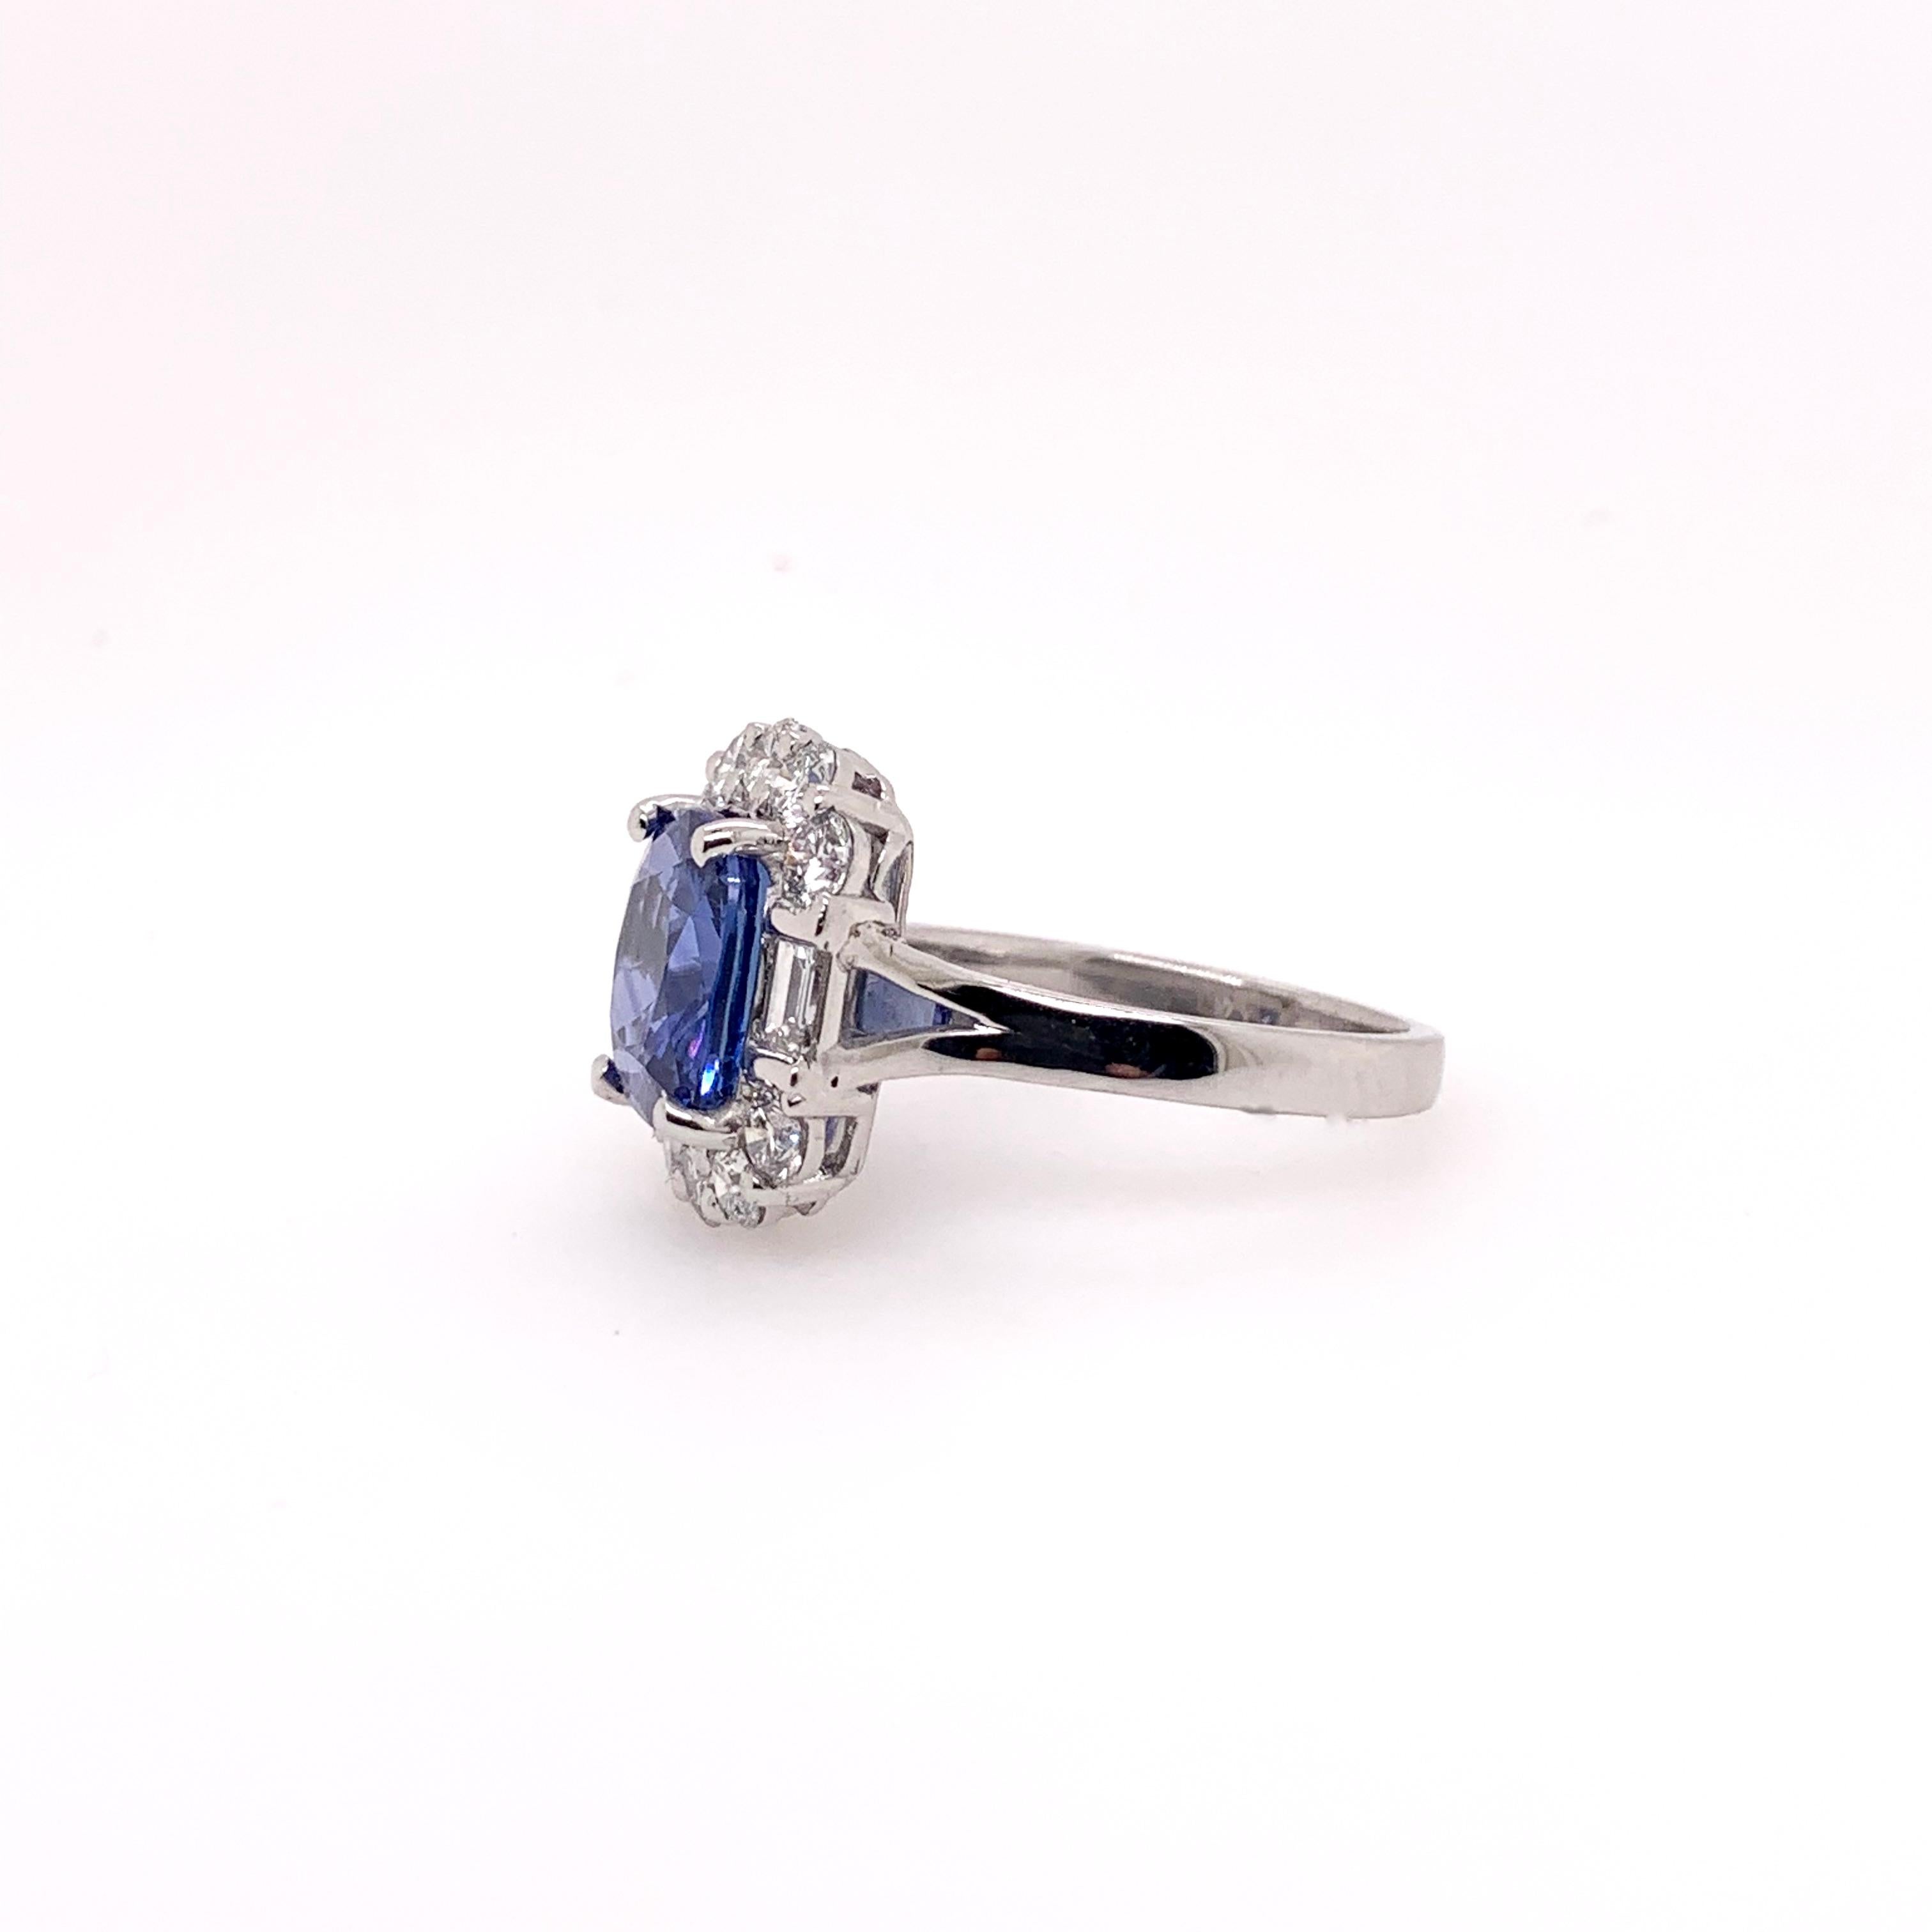 Contemporary GIA Certified Blue Sapphire Diamond Cocktail Ring in Platinum